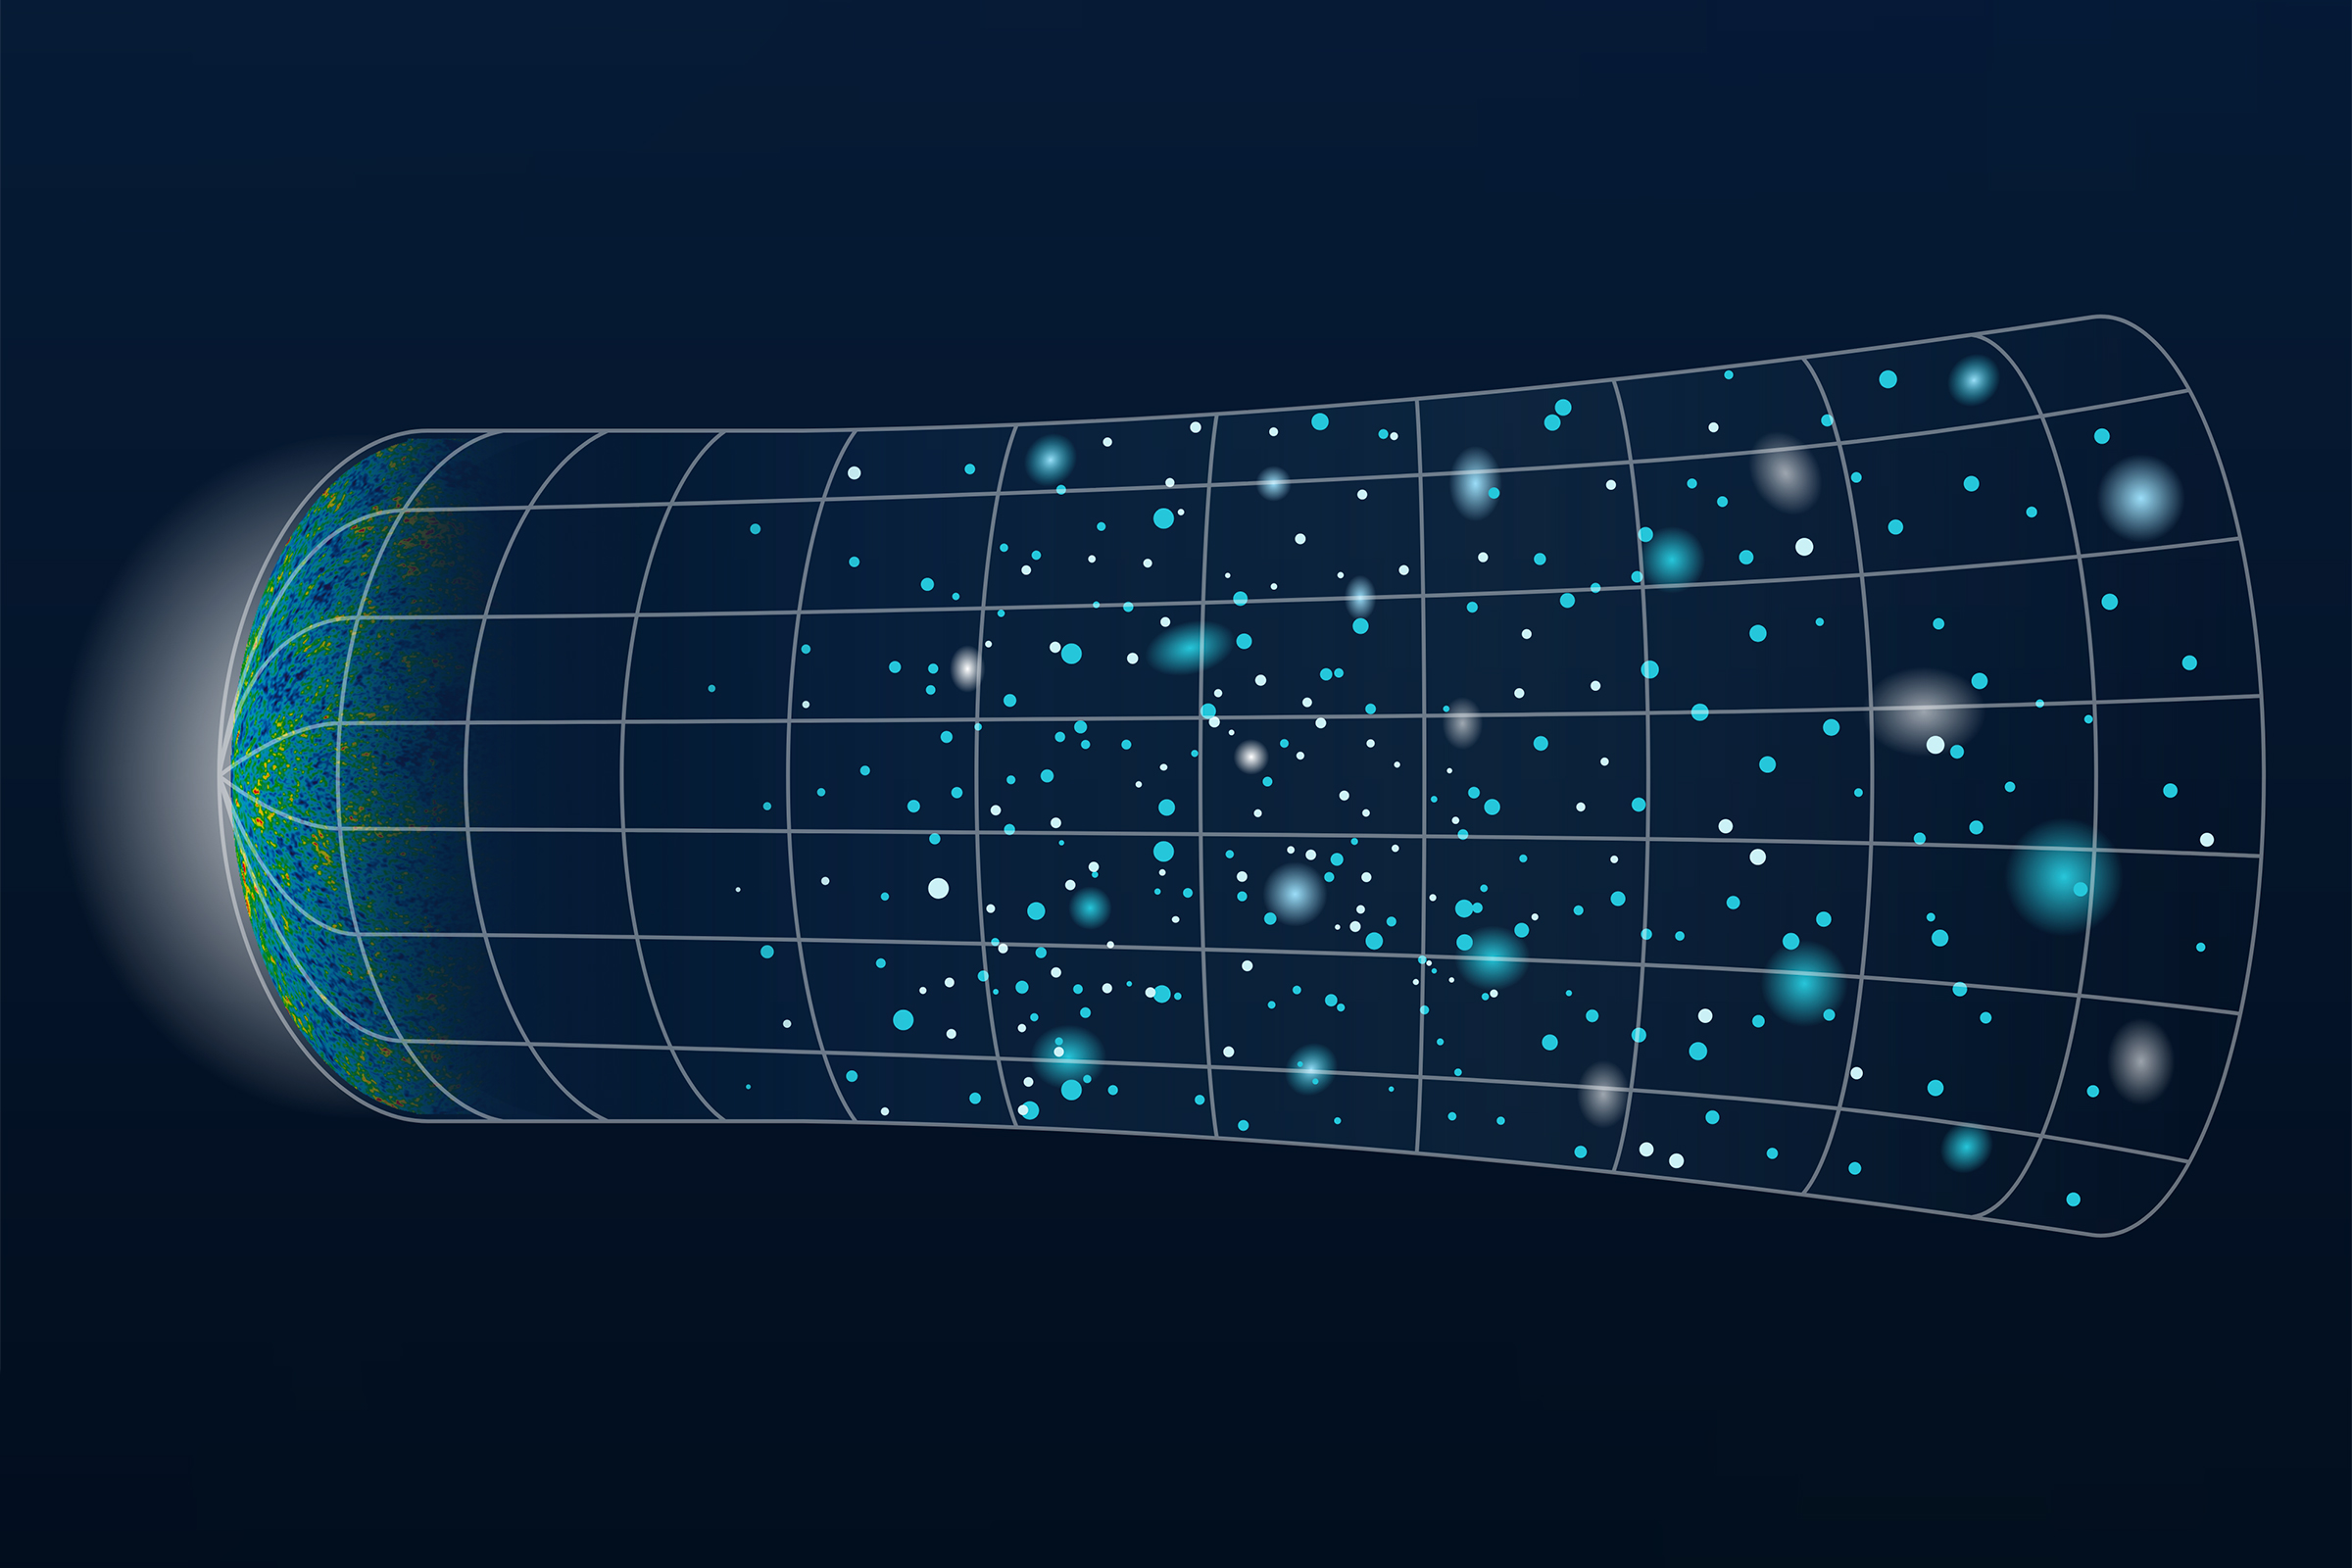 Av isual diagram depicting the origins and expanse of the universe